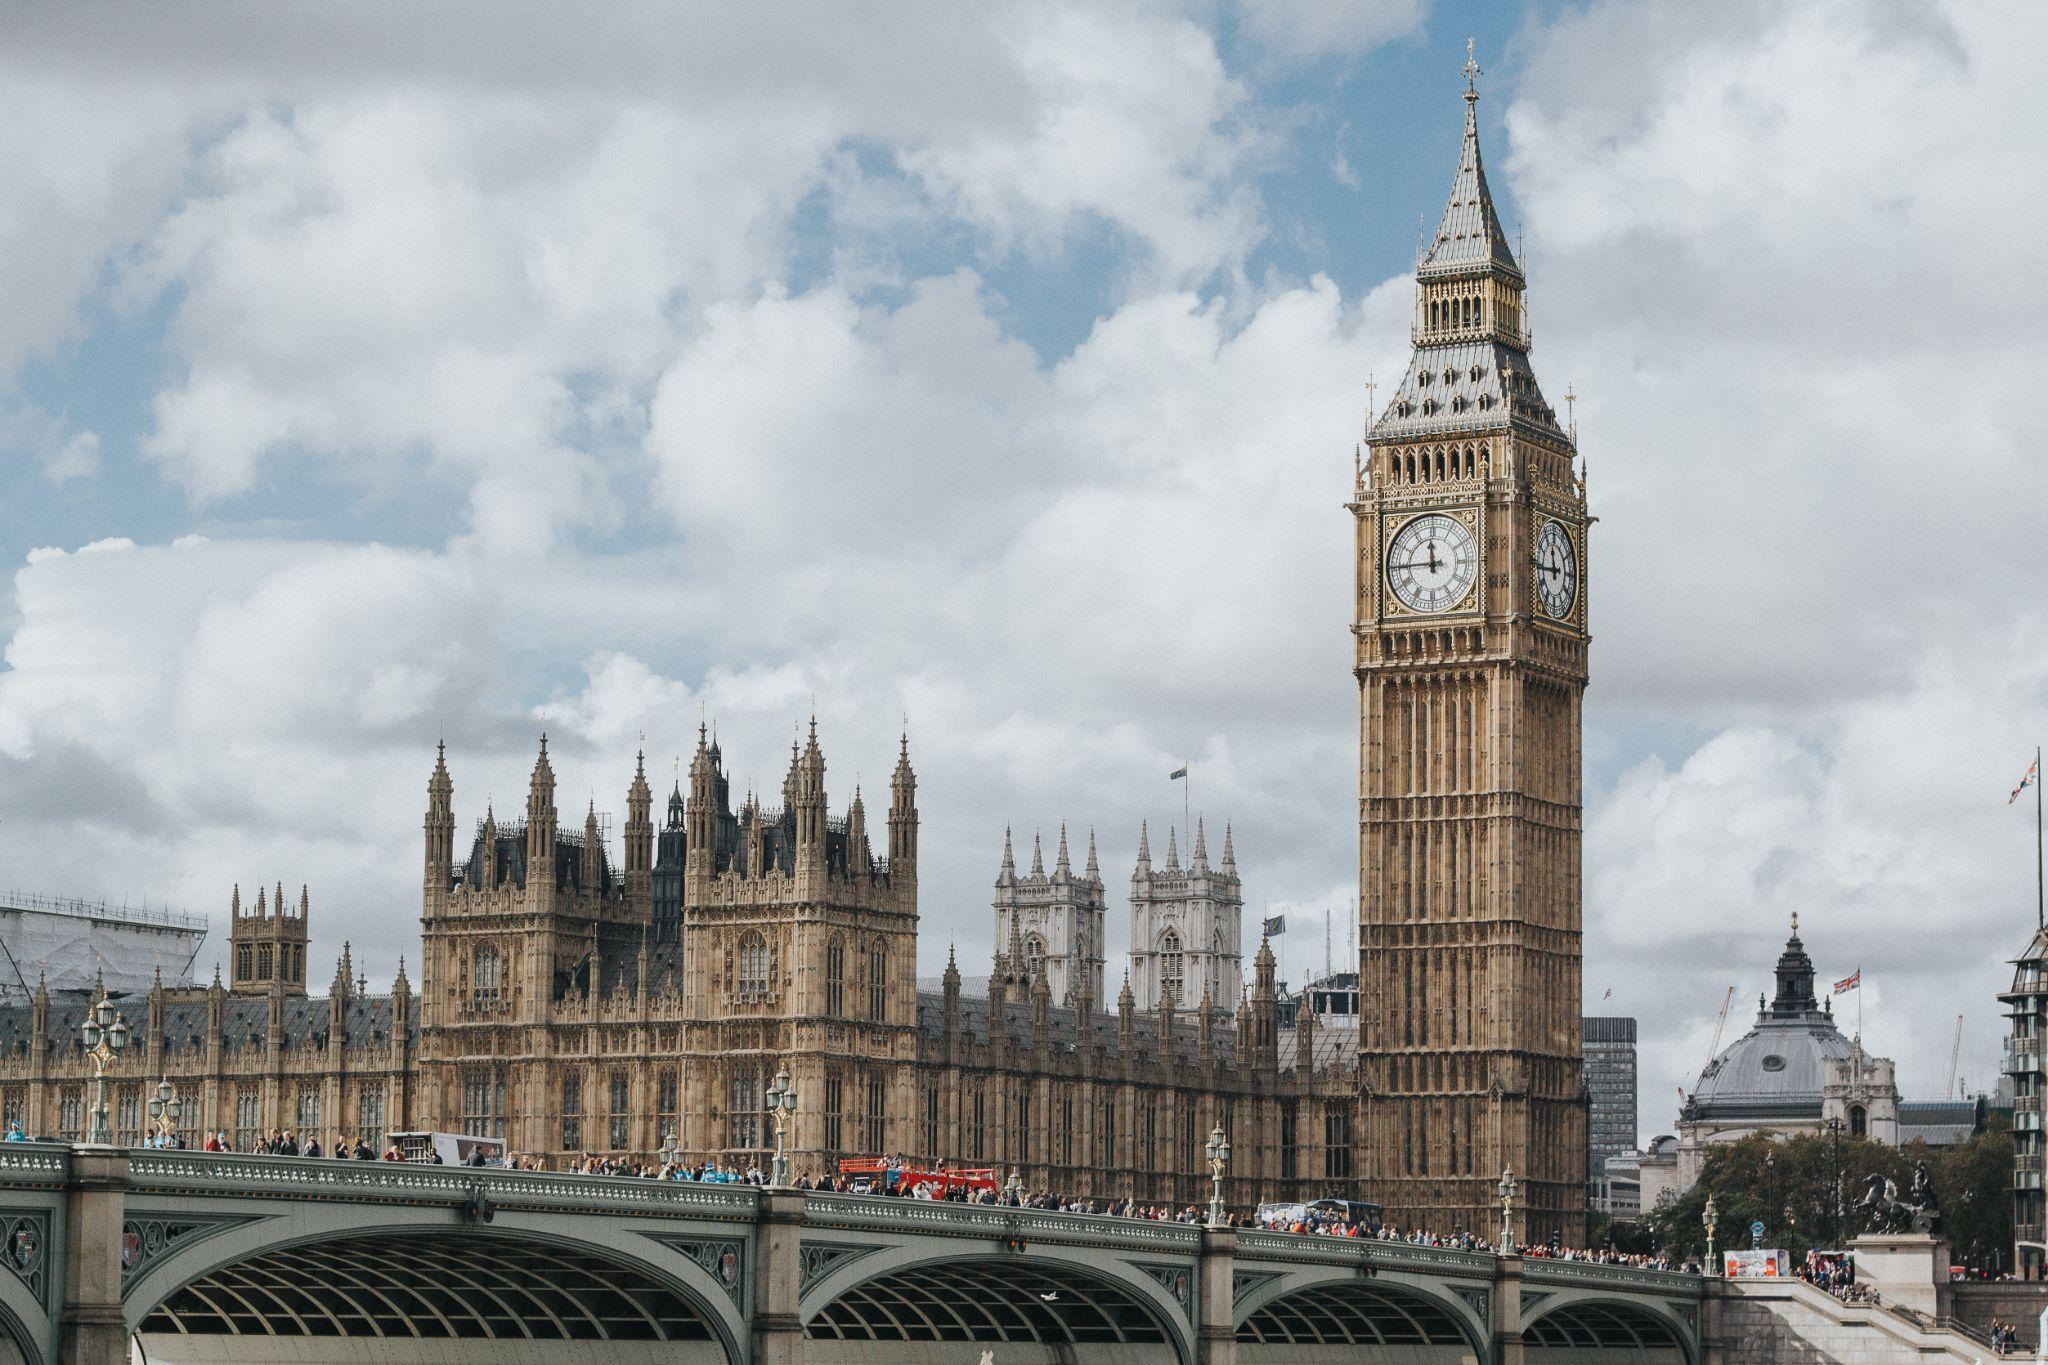 An image of Big Ben and Parliament in London which is a dream destination for many people.